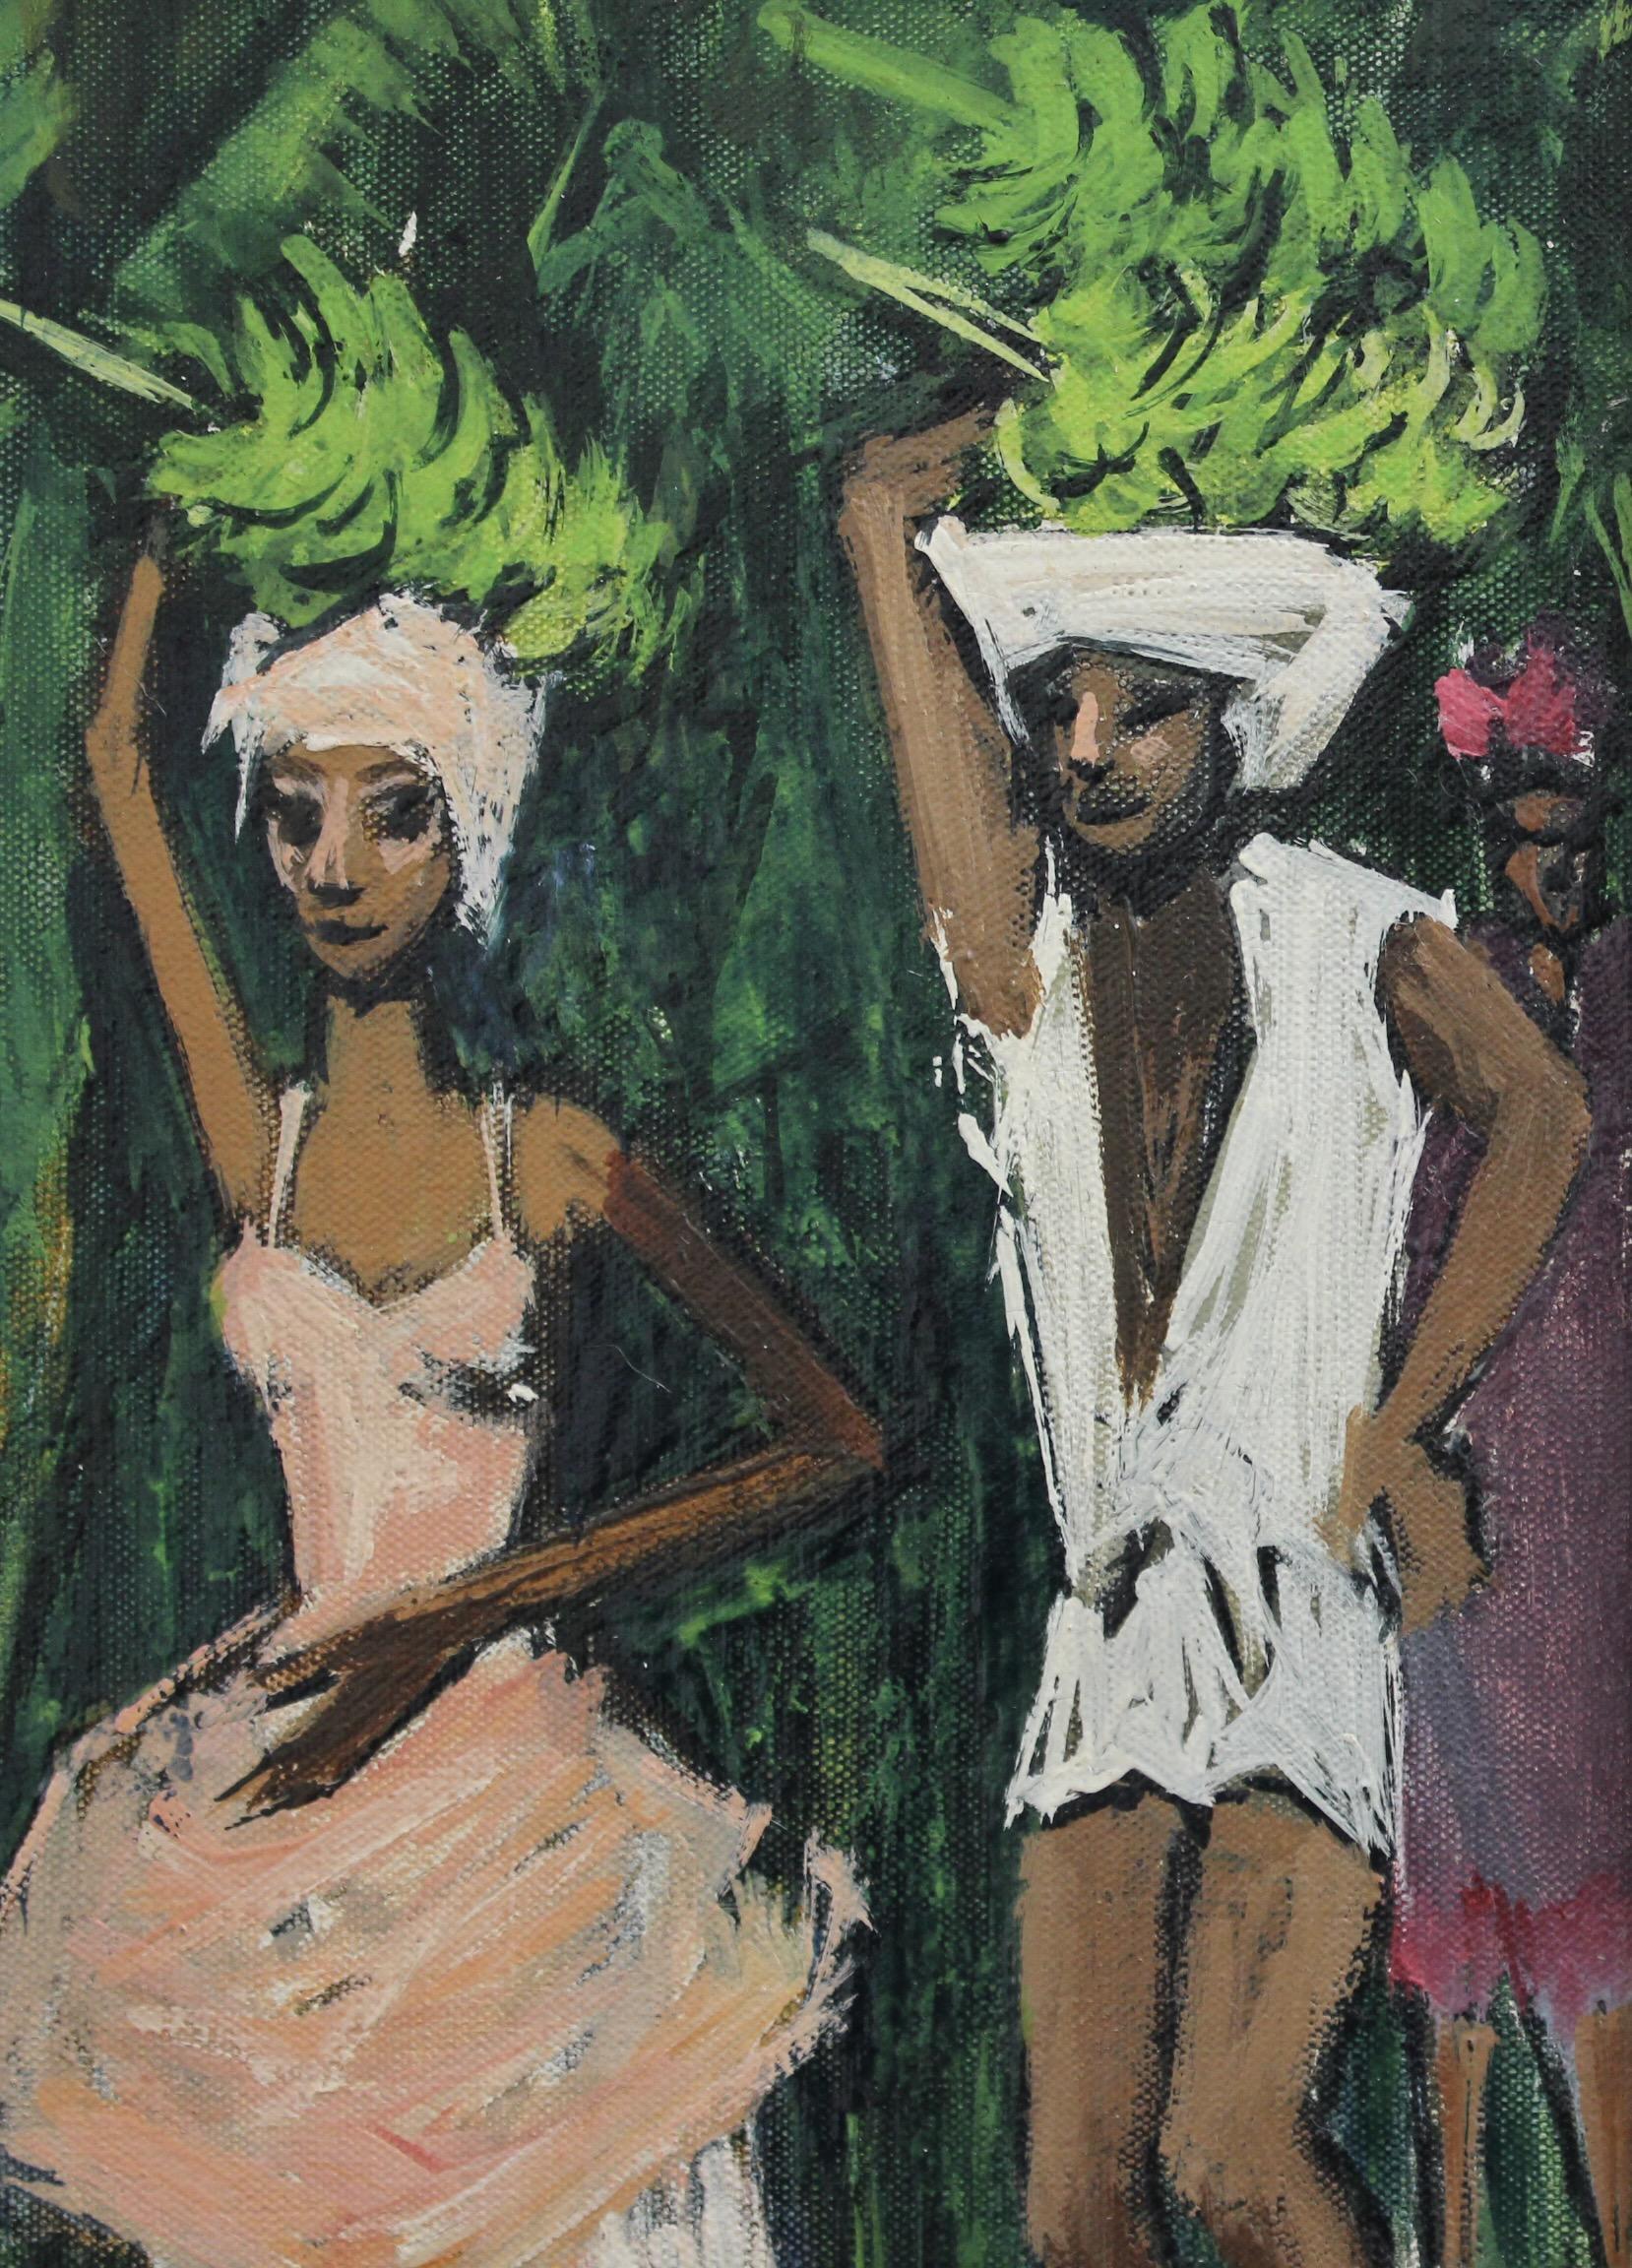 'The Banana Plantation Guadeloupe', oil on canvas, by Robert Humblot (1959). In 1959, when the artist visited French Guadeloupe, he painted several colourful pieces depicting workers on the island which were later used in the Maison Nicolas annual